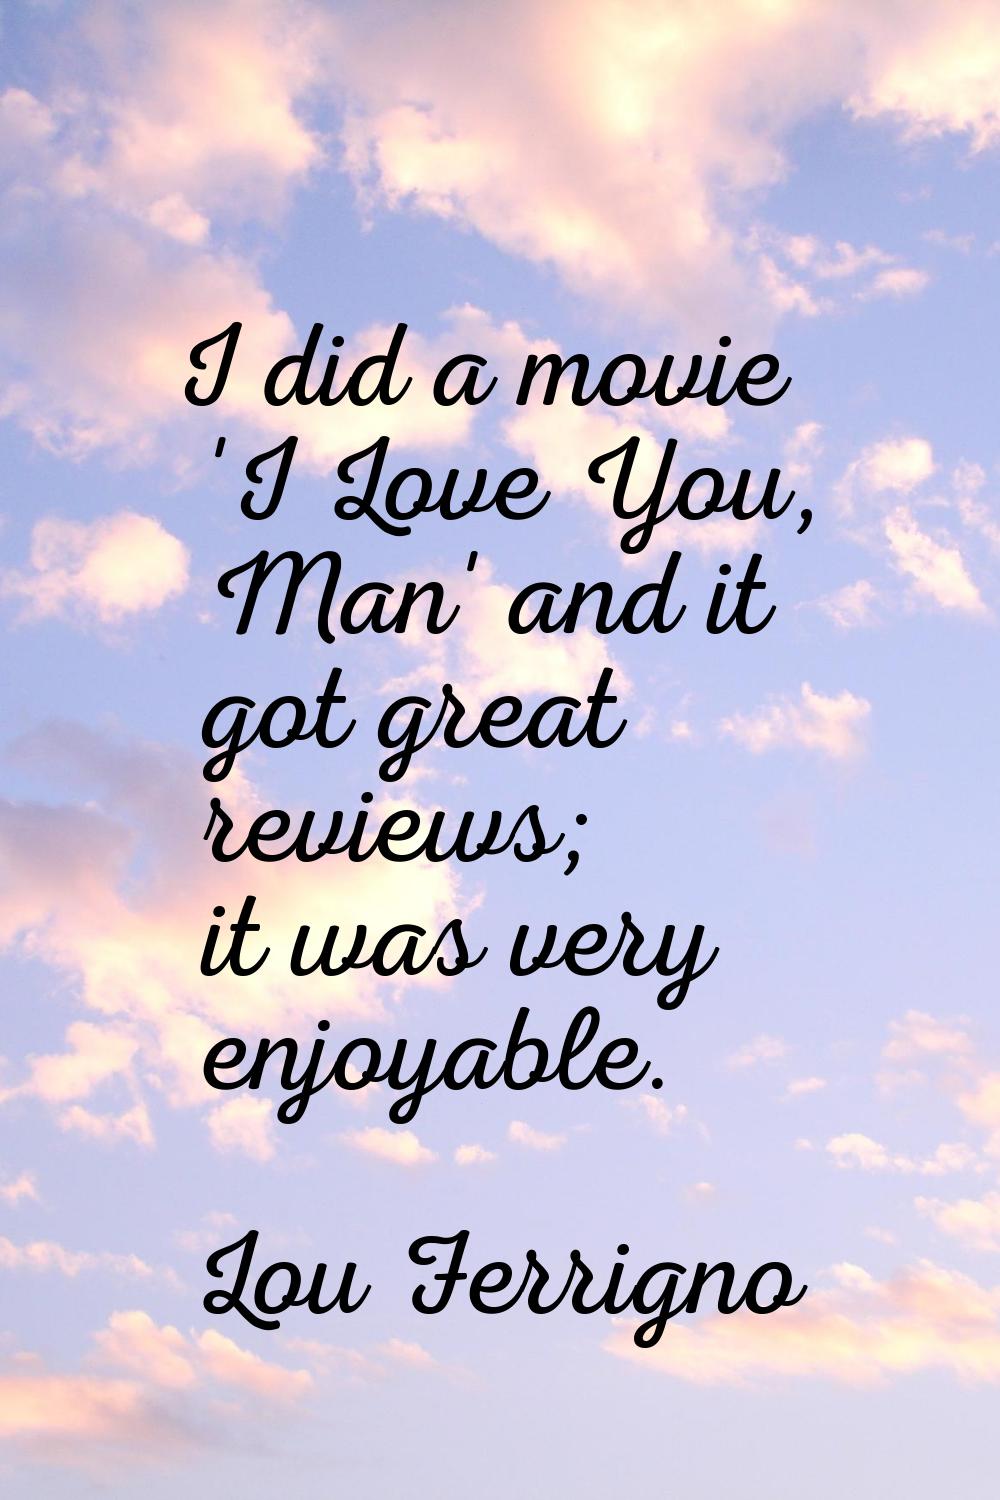 I did a movie 'I Love You, Man' and it got great reviews; it was very enjoyable.